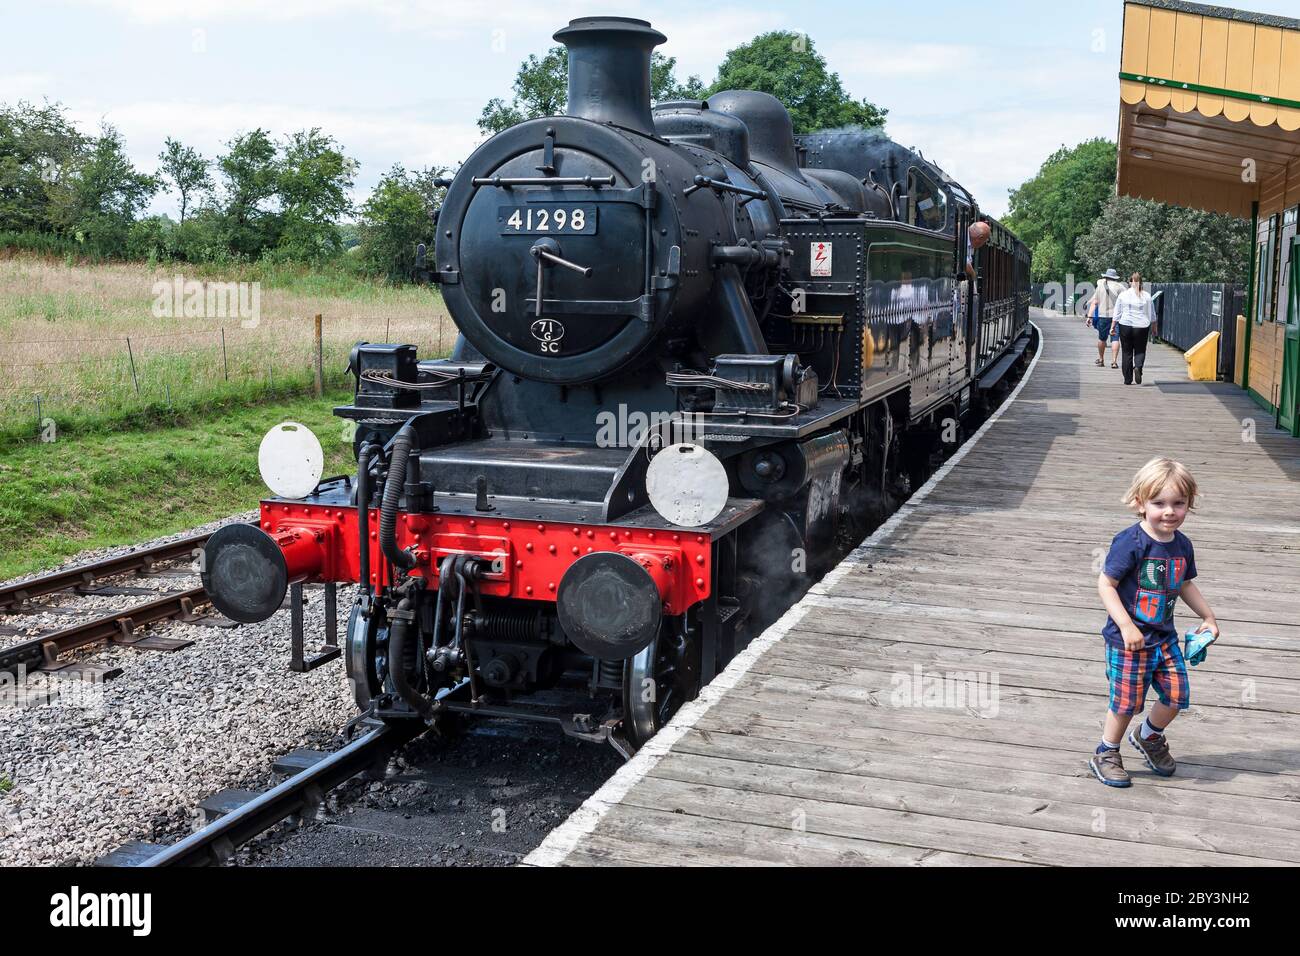 A young railway enthusiast on the platform at Smallbrook Junction on the Isle of Wight Steam Railway, Isle of Wight, England, UK.  MODEL RELEASED Stock Photo